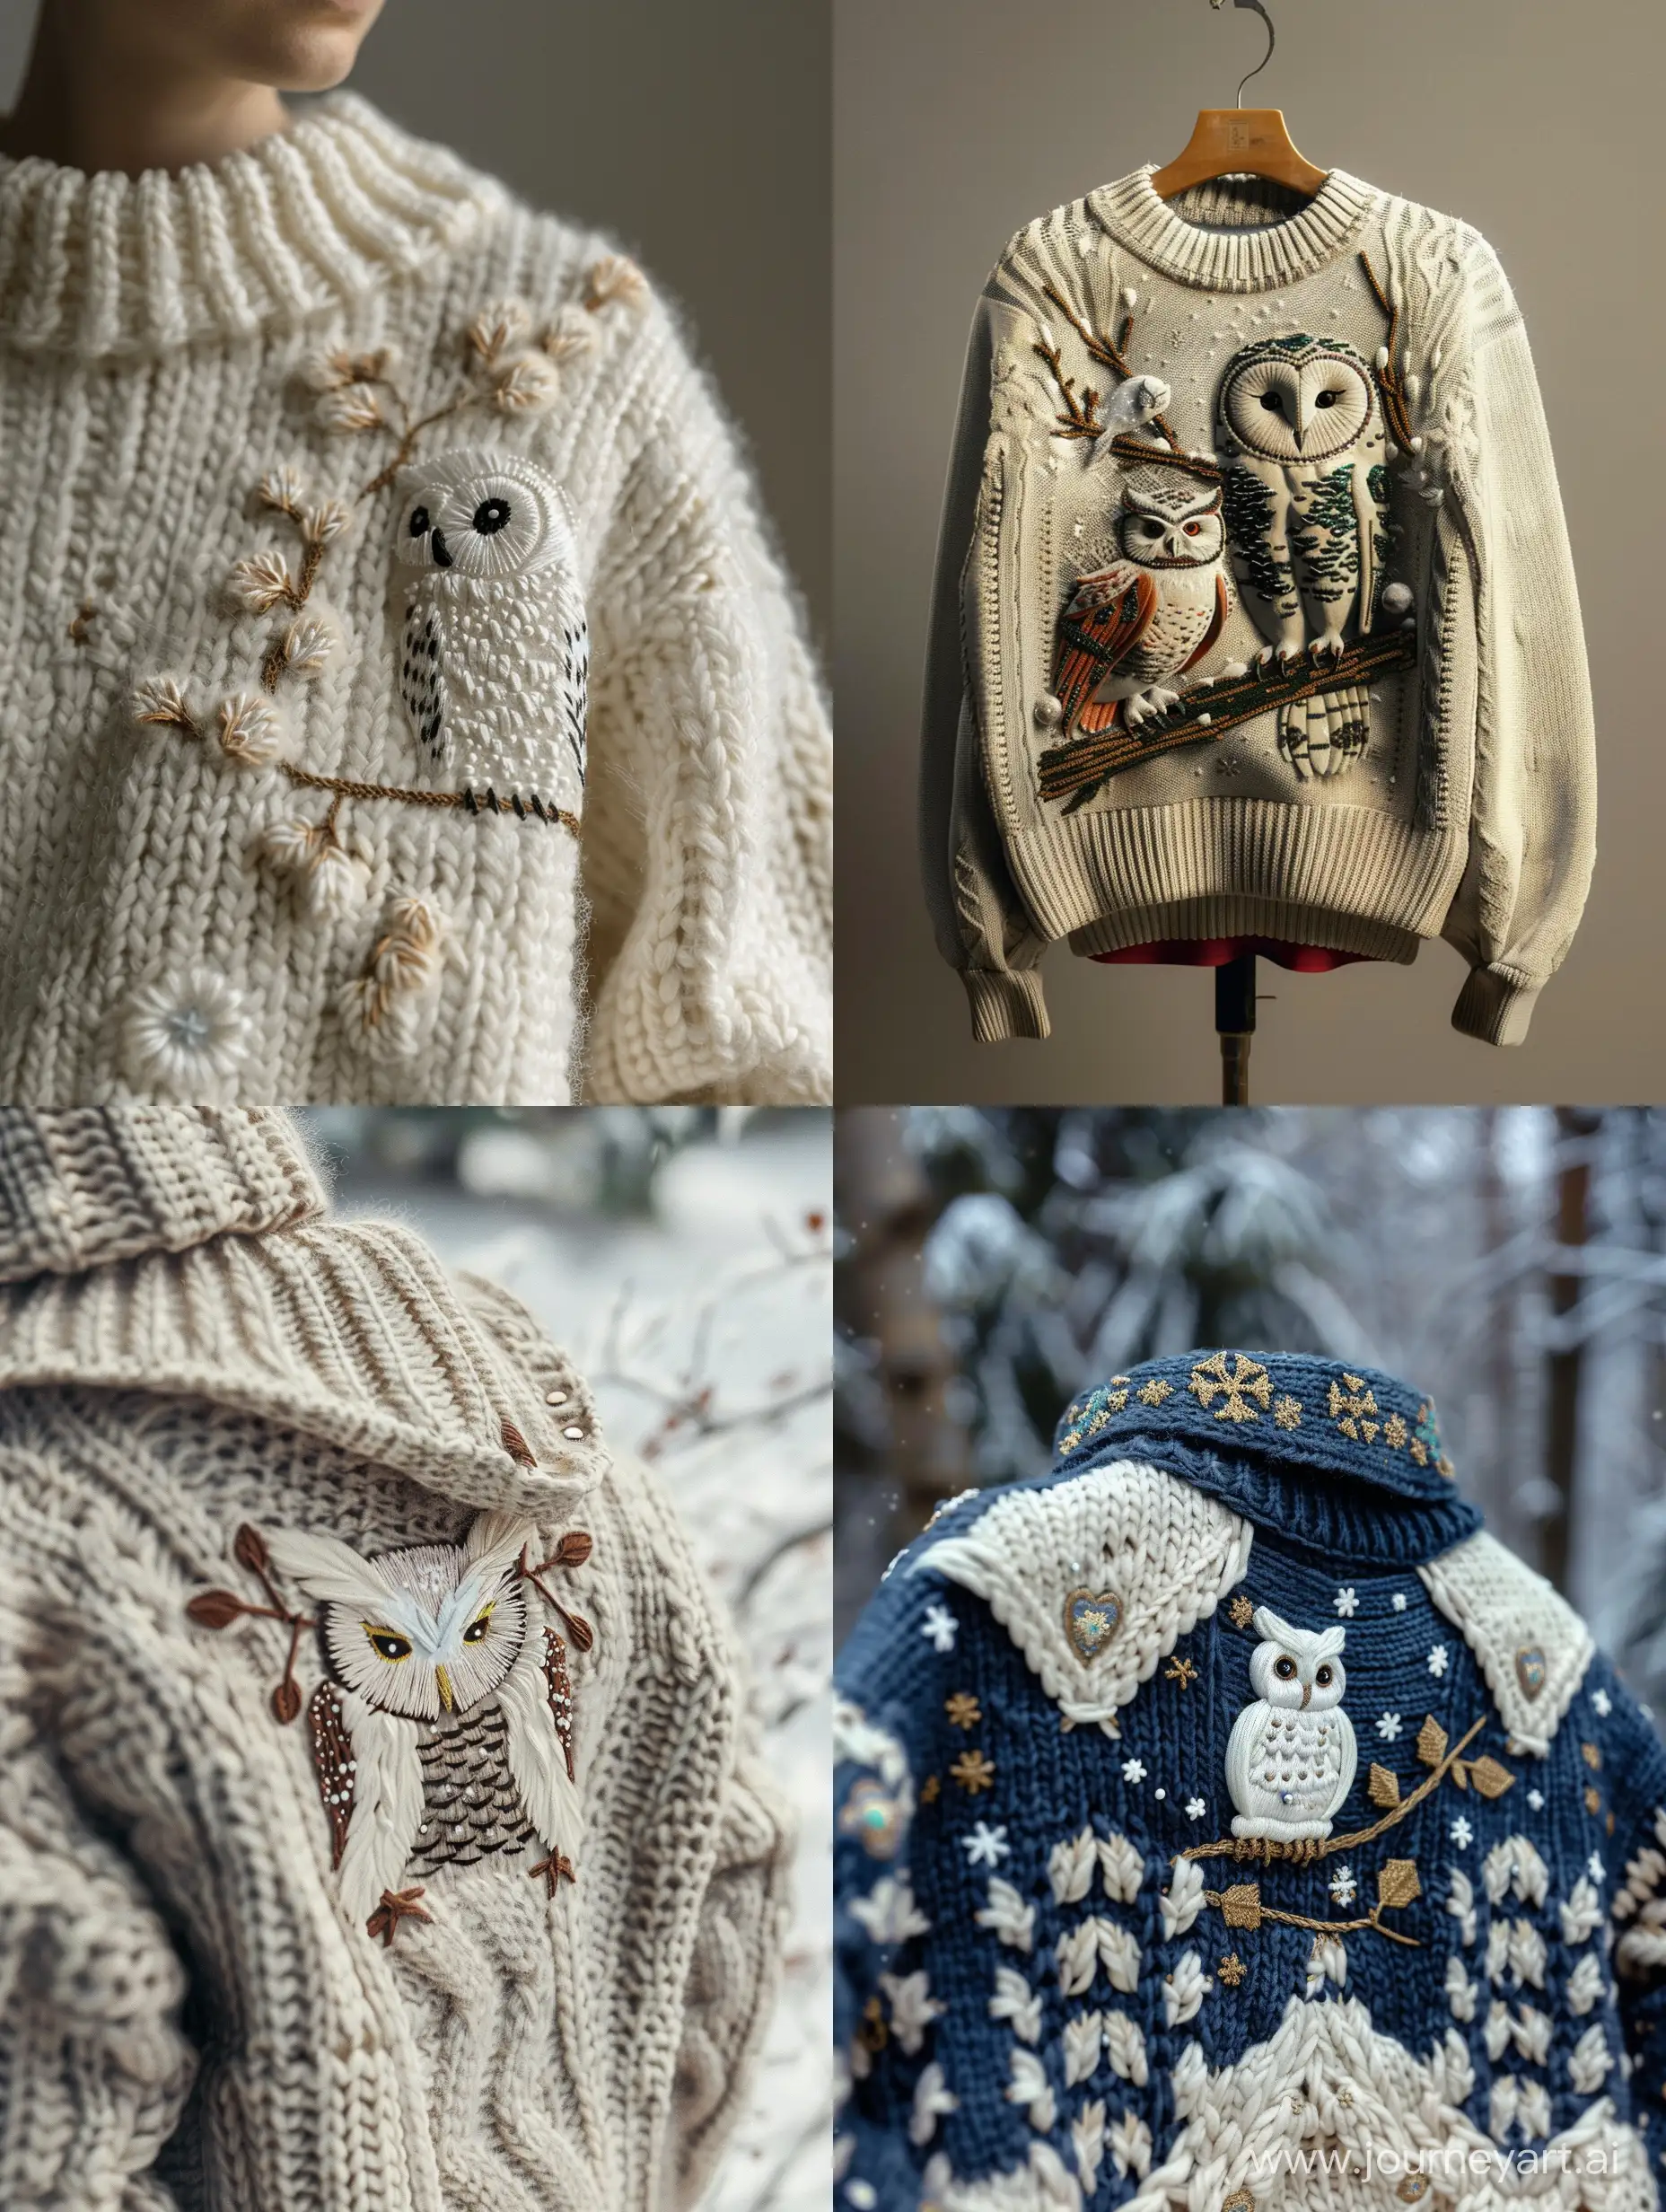 photorealistic knitted sweater with snow owl embroidery, cozy embroidery, cold tones --ar 3:4 --no 18314